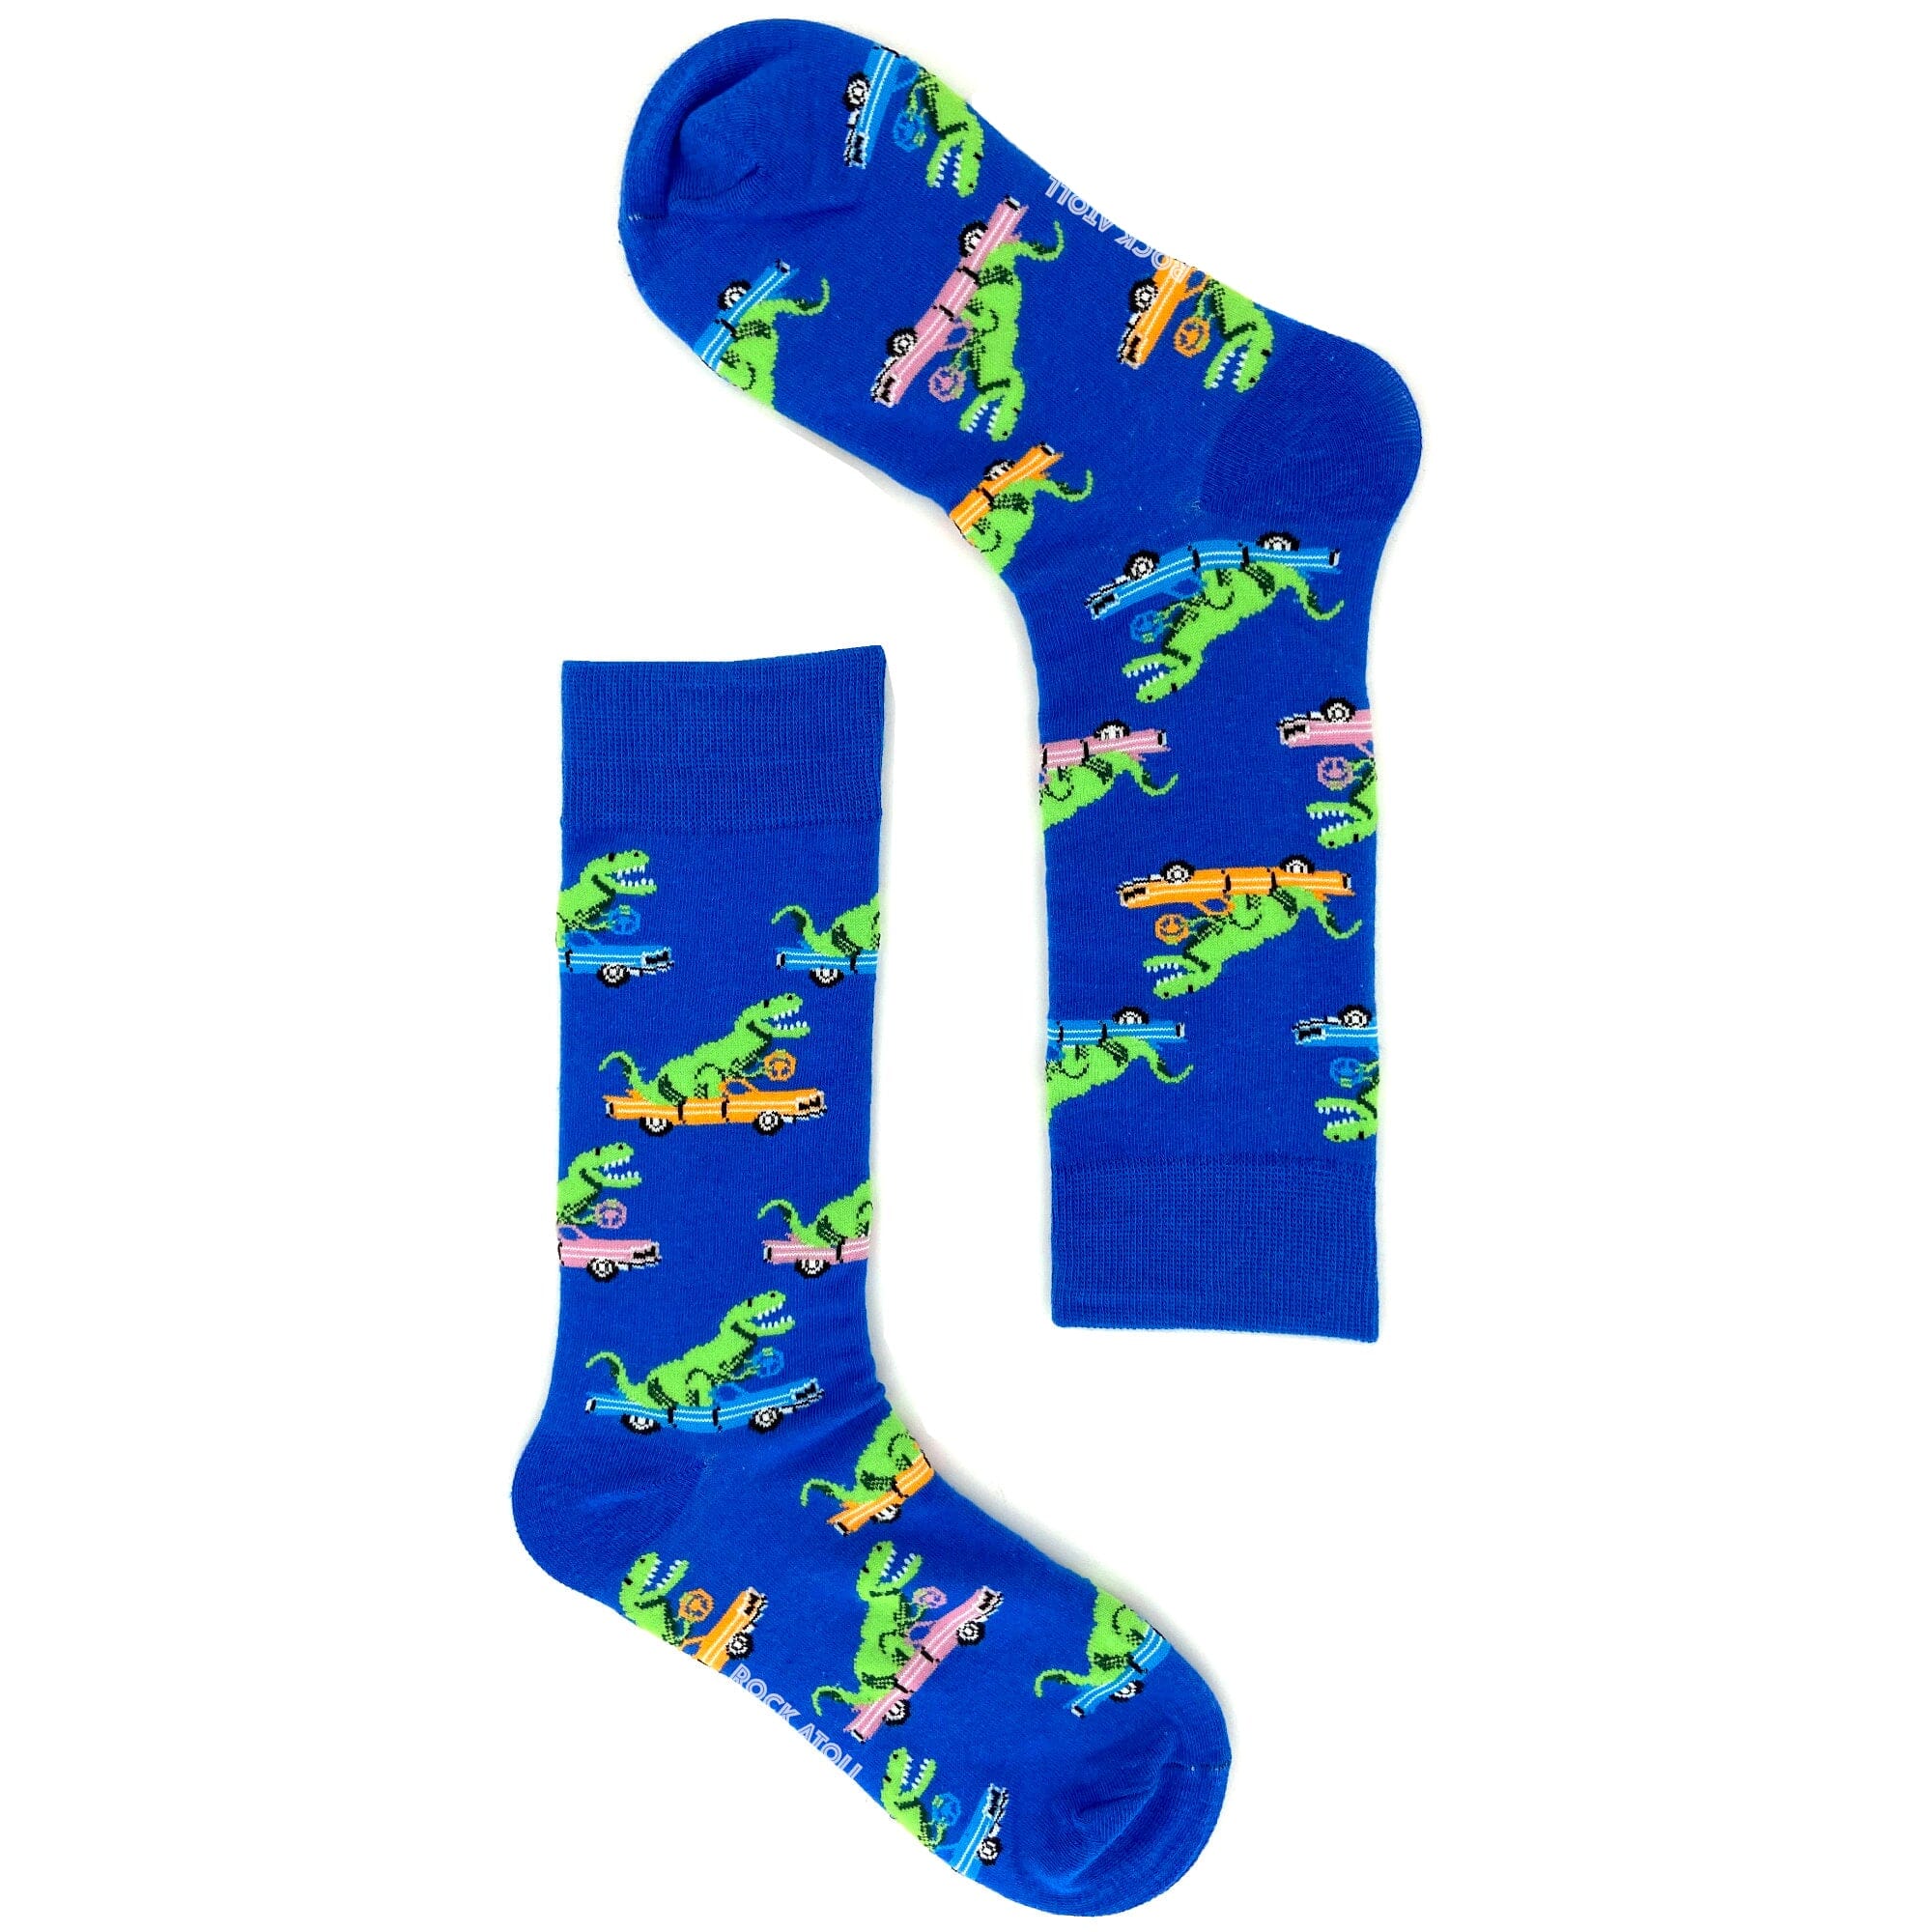 Funny Dinosaurs Driving Race Cars Patterned Silly Funky Novelty Socks